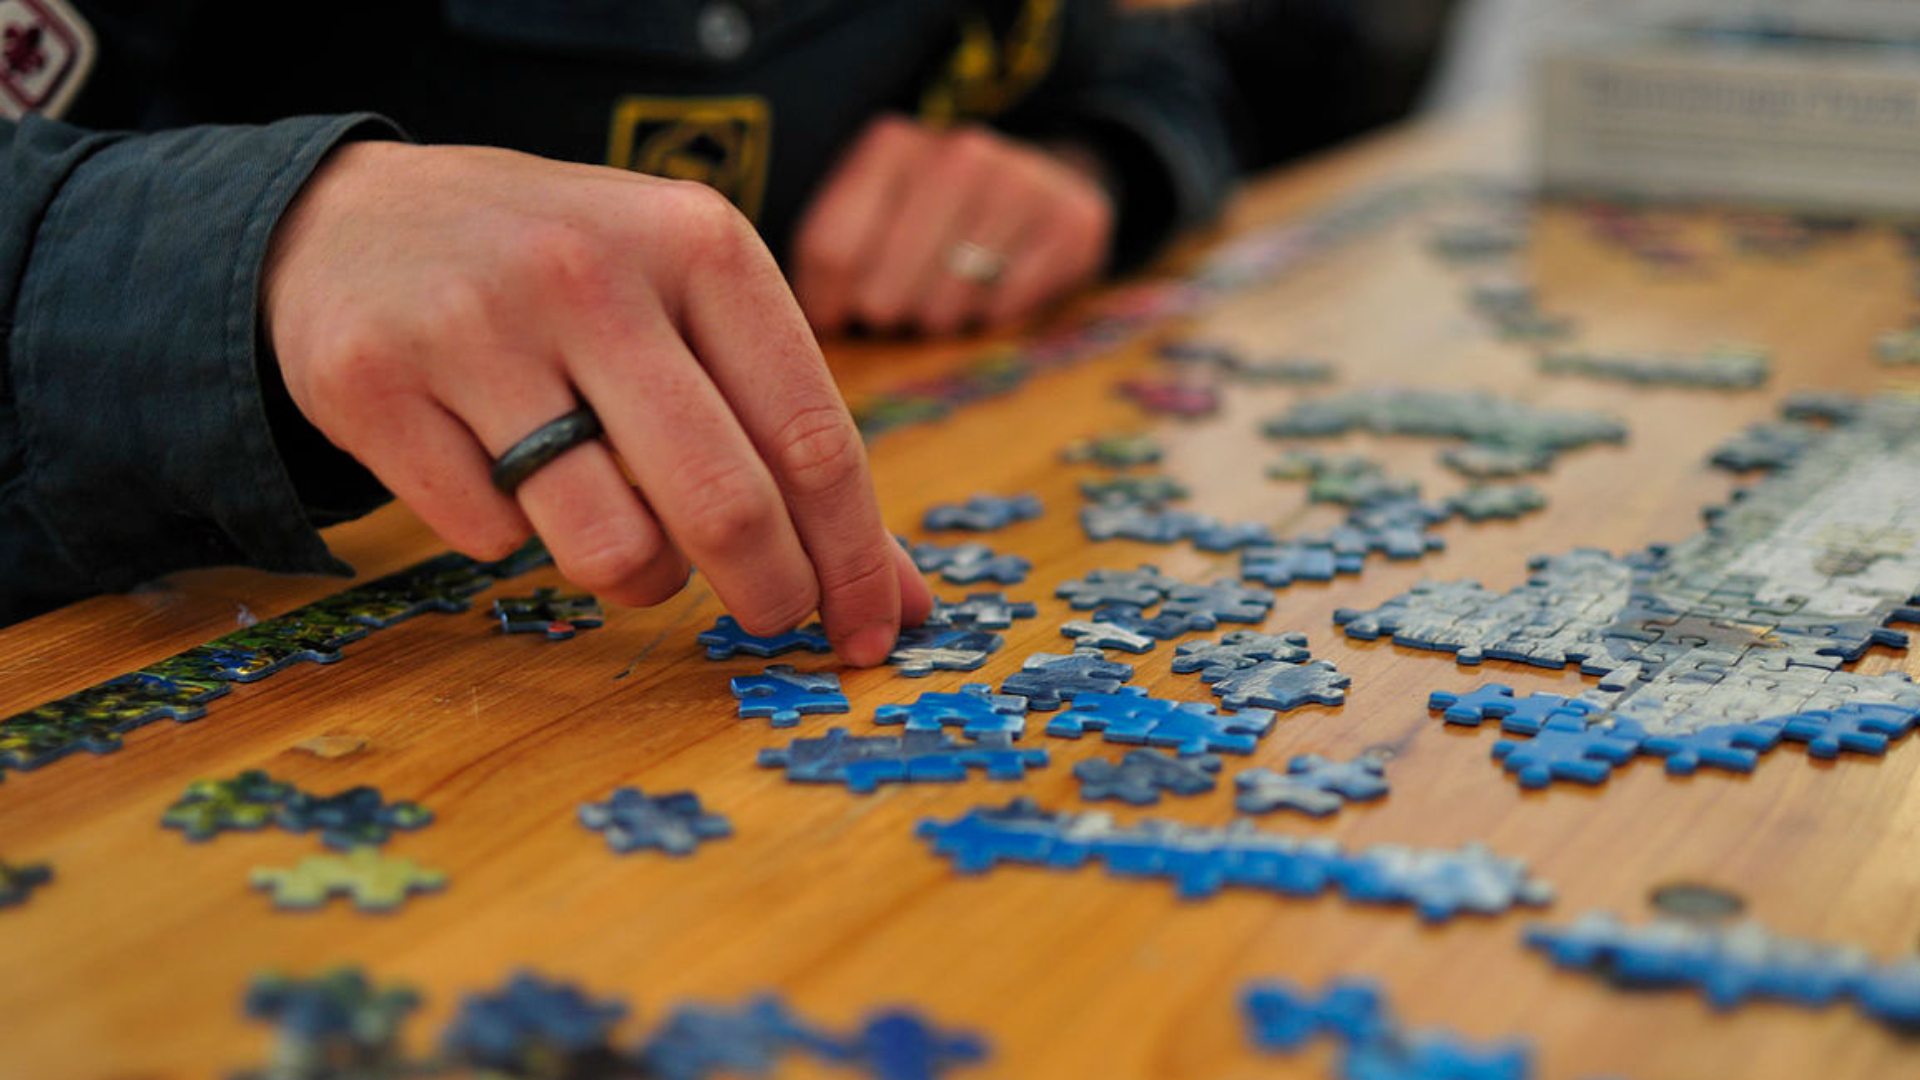 An expert reveals her best puzzle-solving tips and tricks